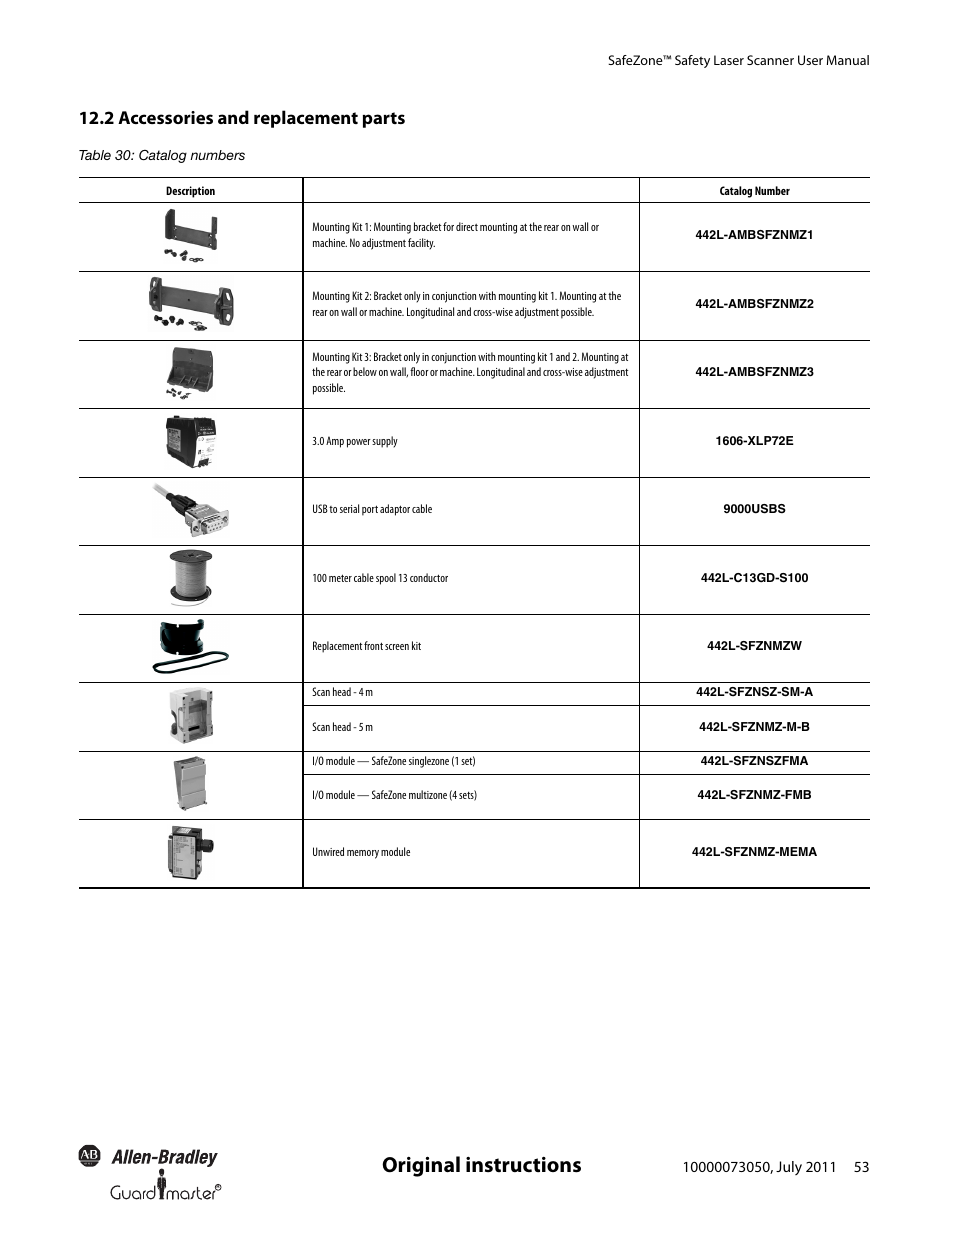 Original instructions, 2 accessories and replacement parts | Rockwell Automation 442L SafeZone Singlezone & Multizone Safety Laser Scanner User Manual | Page 55 / 60